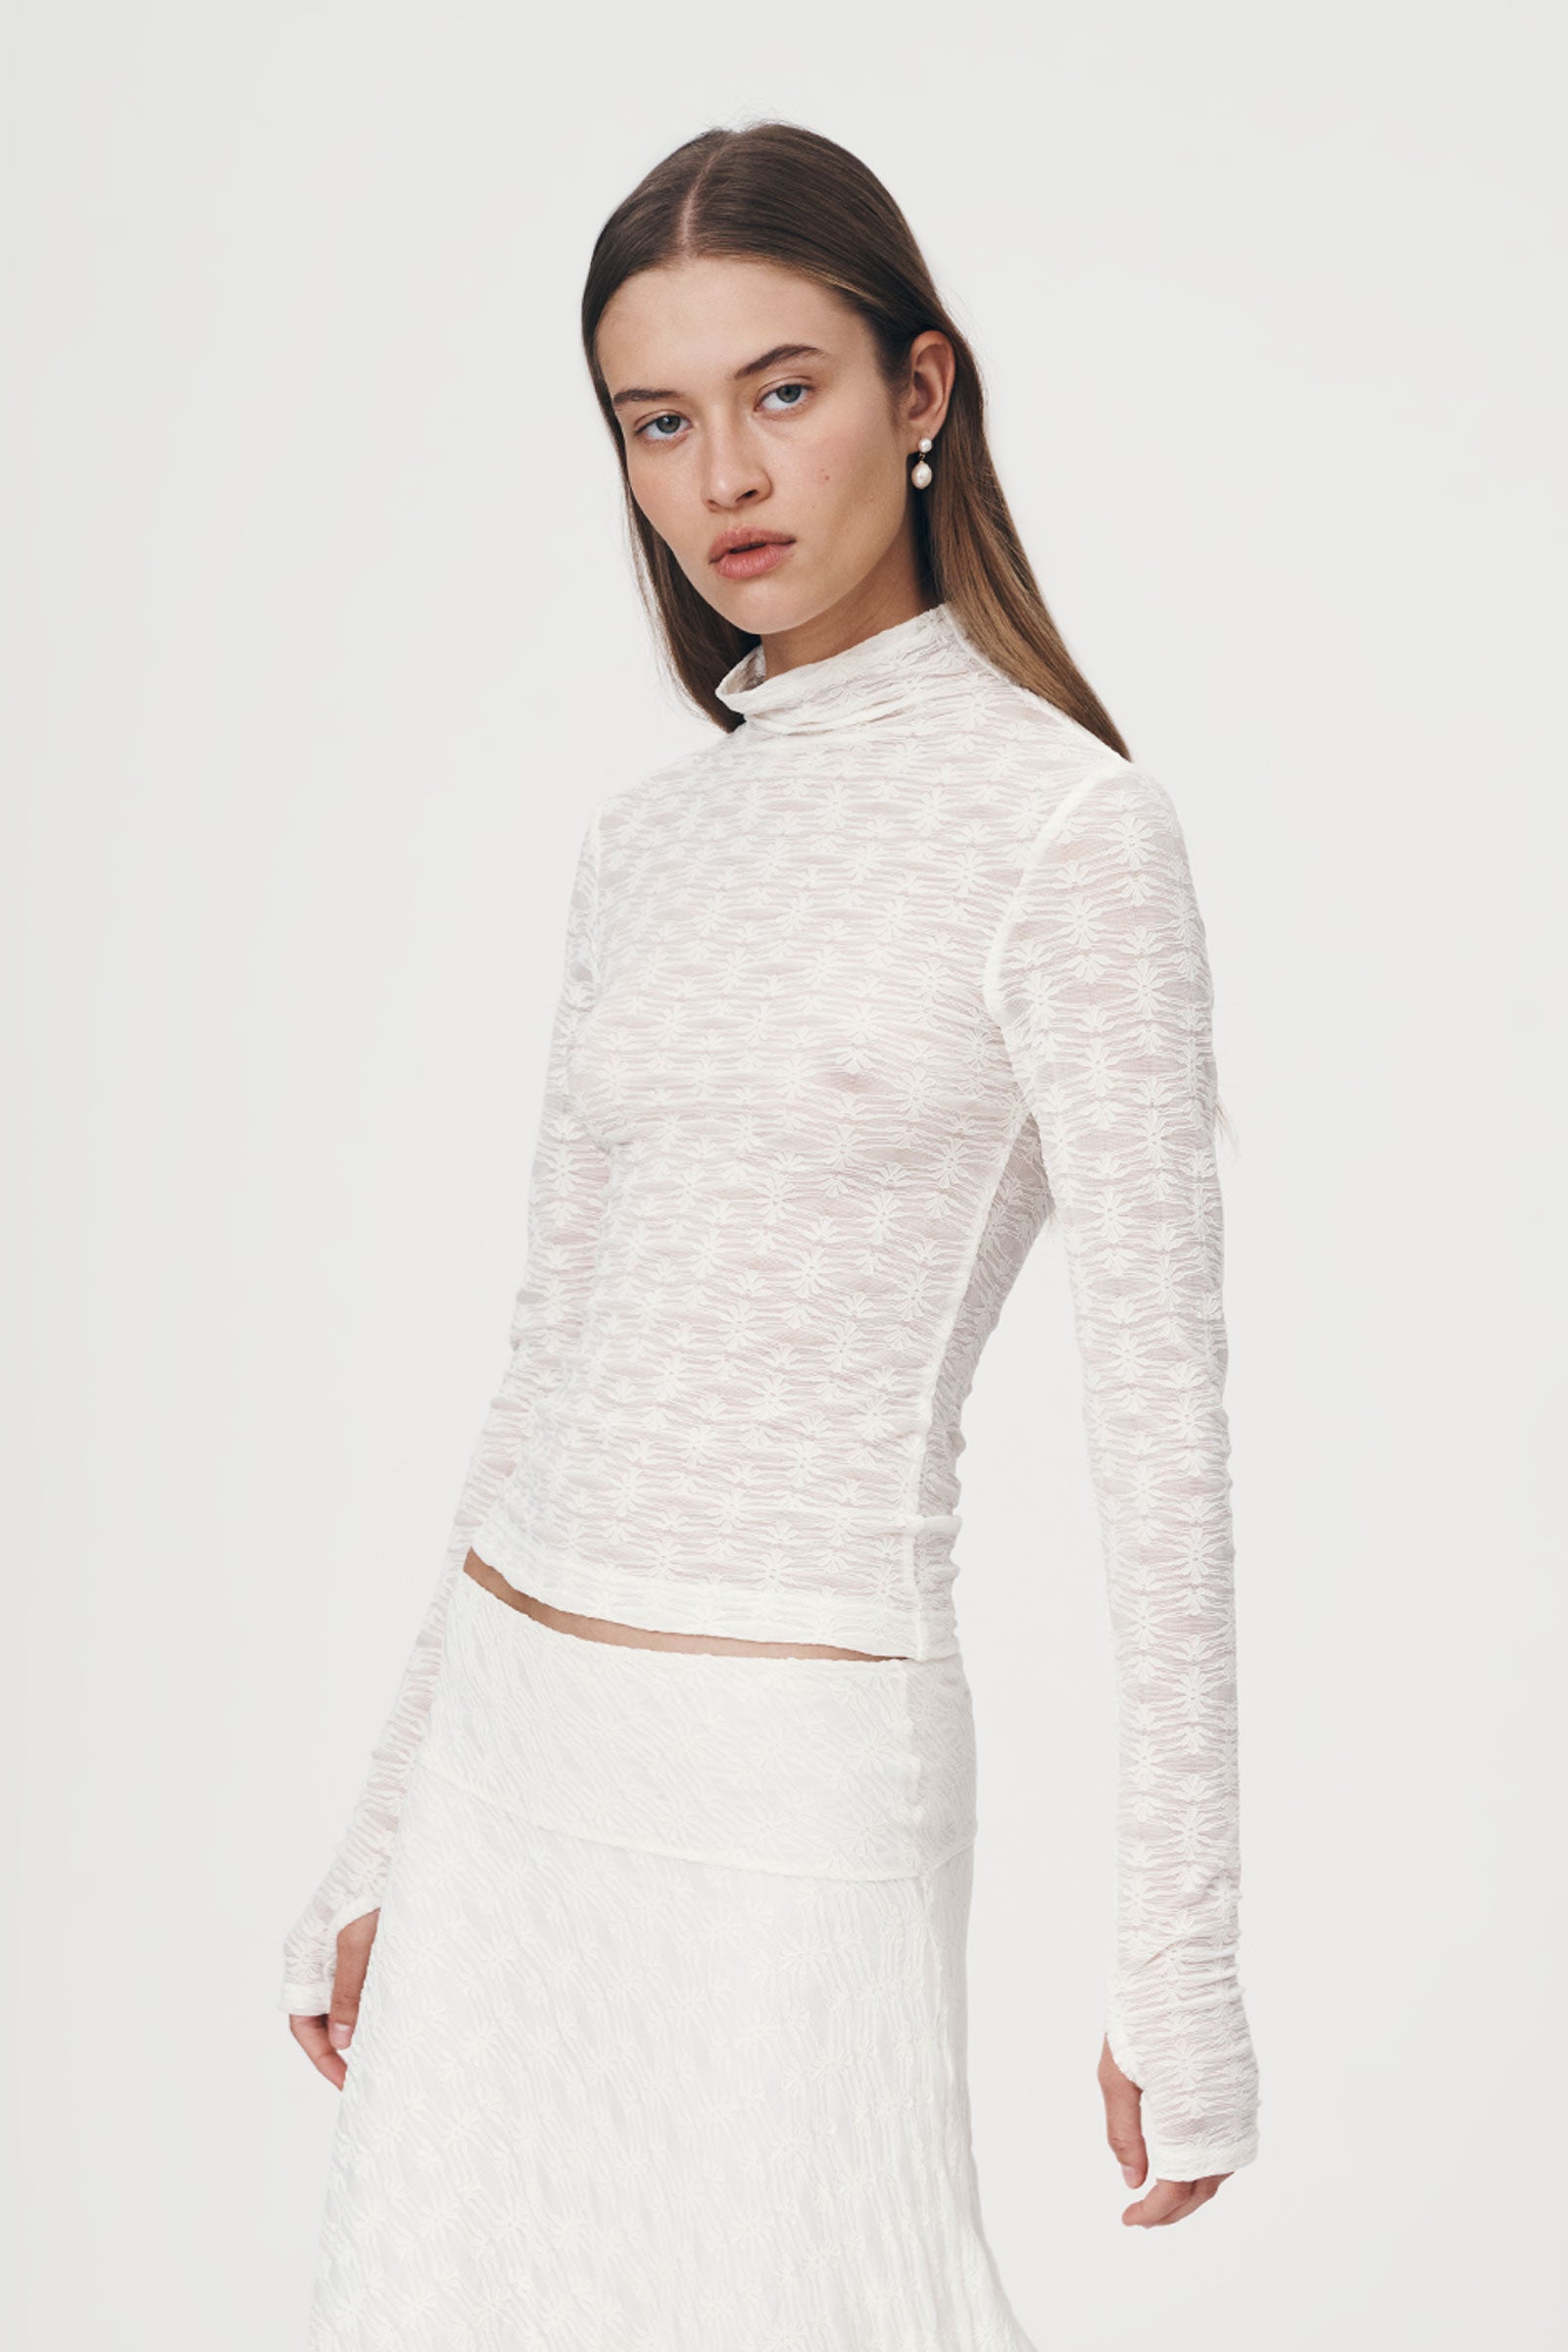 Galo Flower Lace Top // Creme